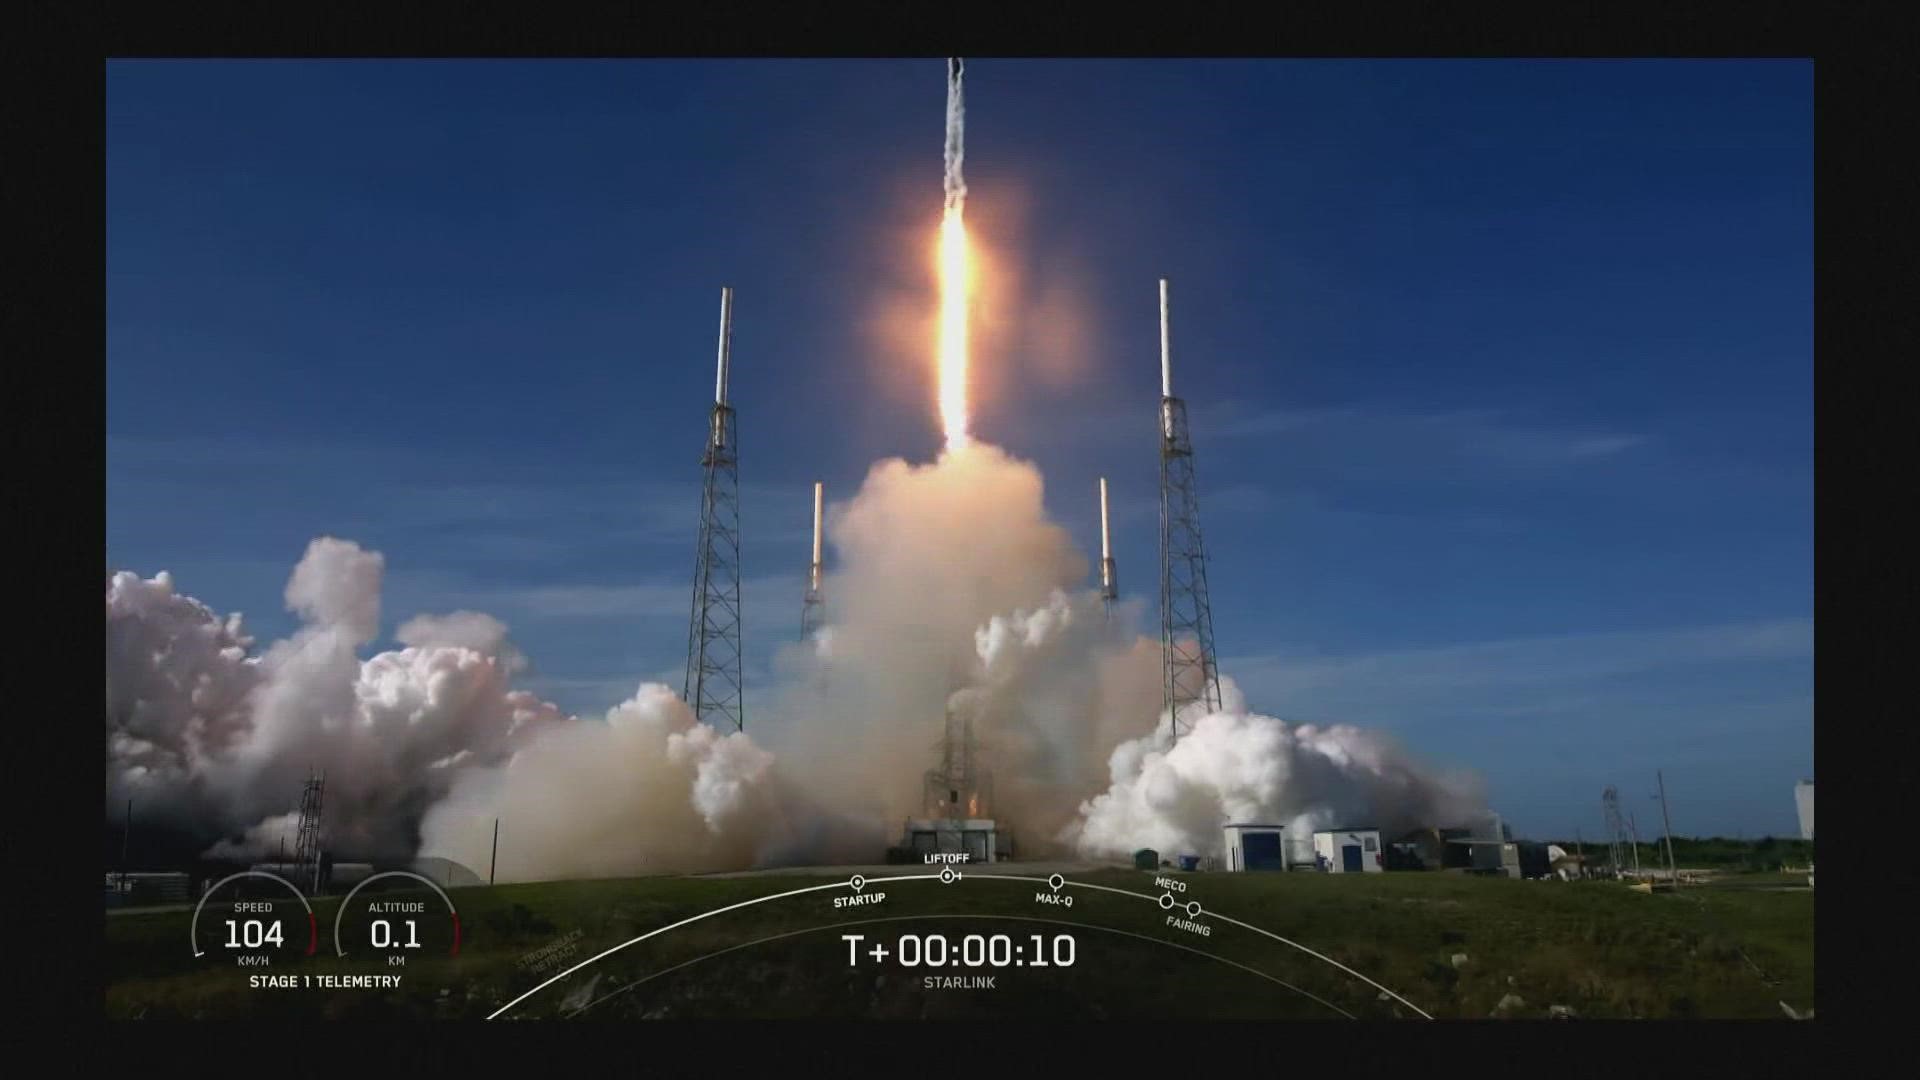 A SpaceX Falcon 9 rocket launched a batch of Starlink internet satellites. The Falcon 9’s first stage booster landed on a drone ship in the Atlantic Ocean.